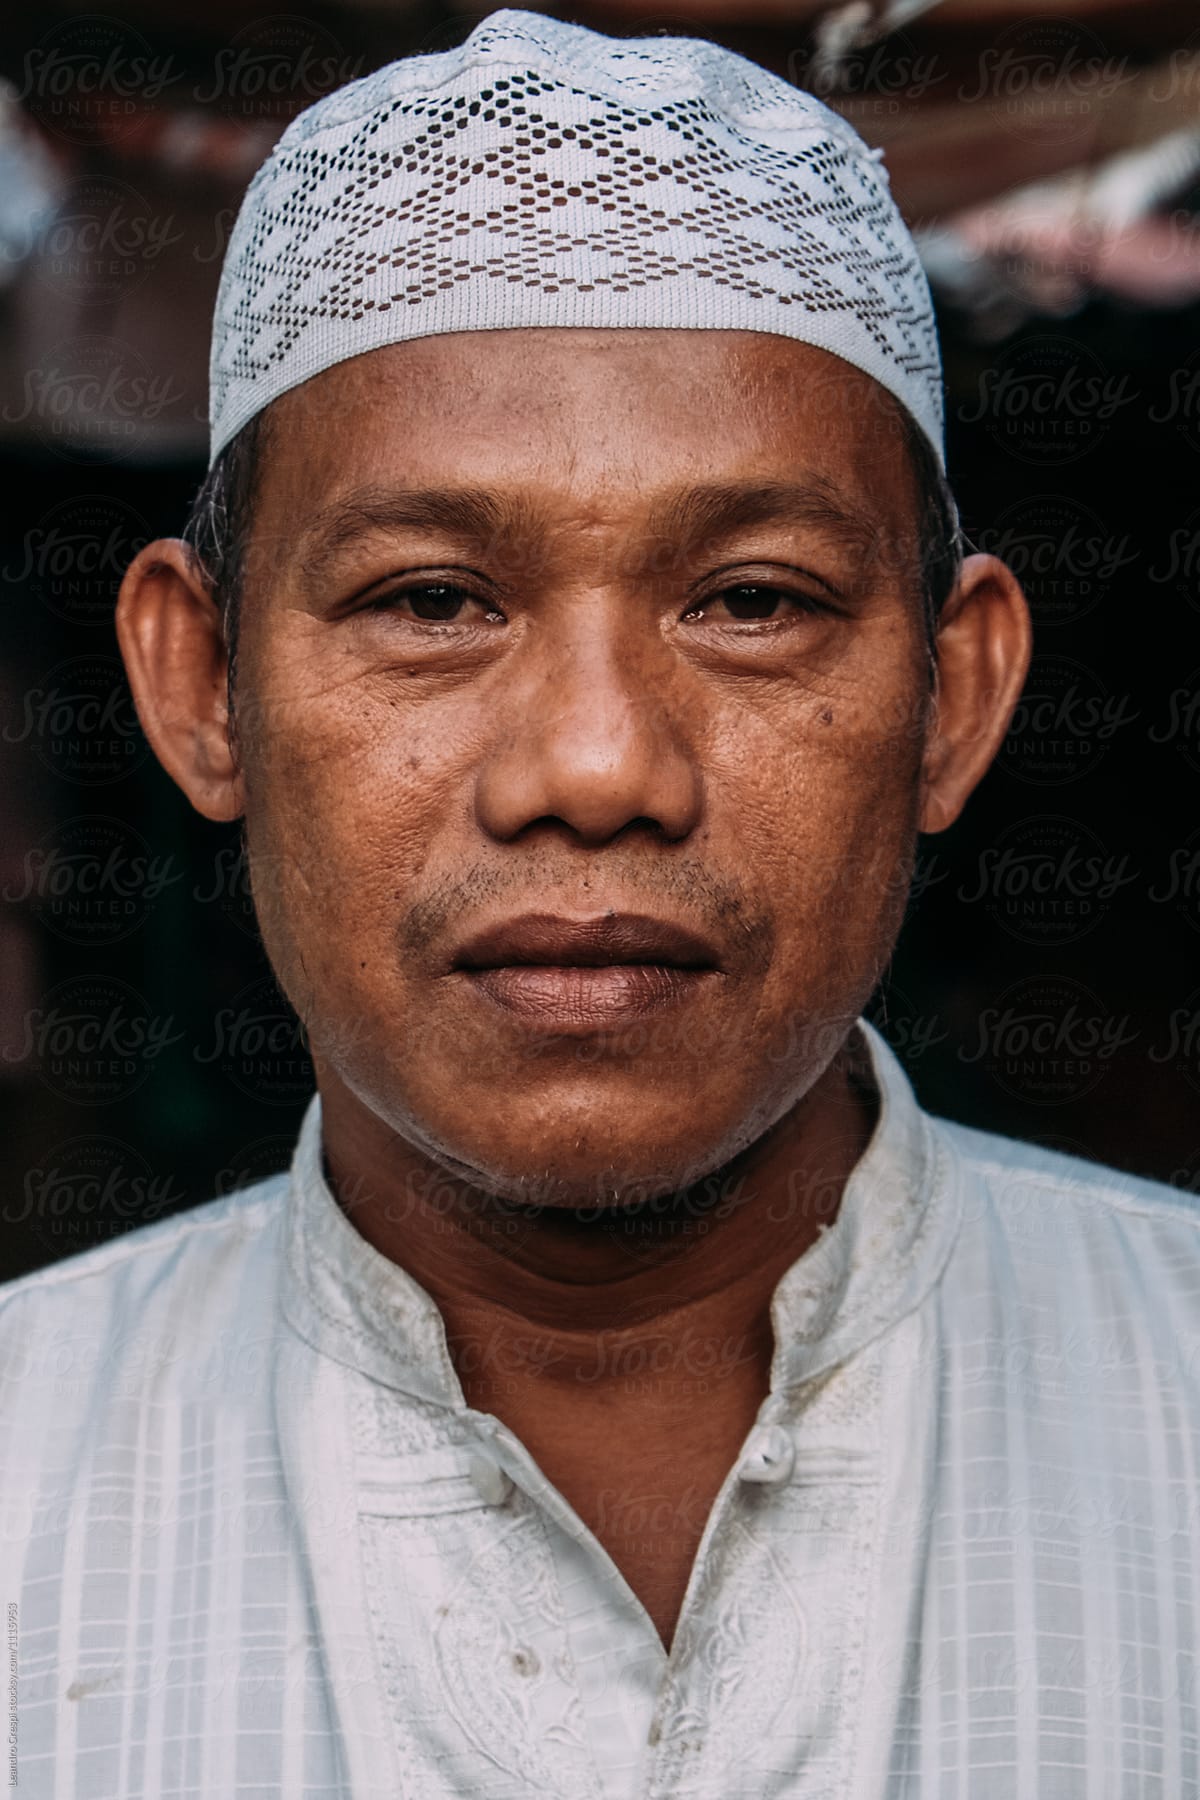 Indonesian man in local market